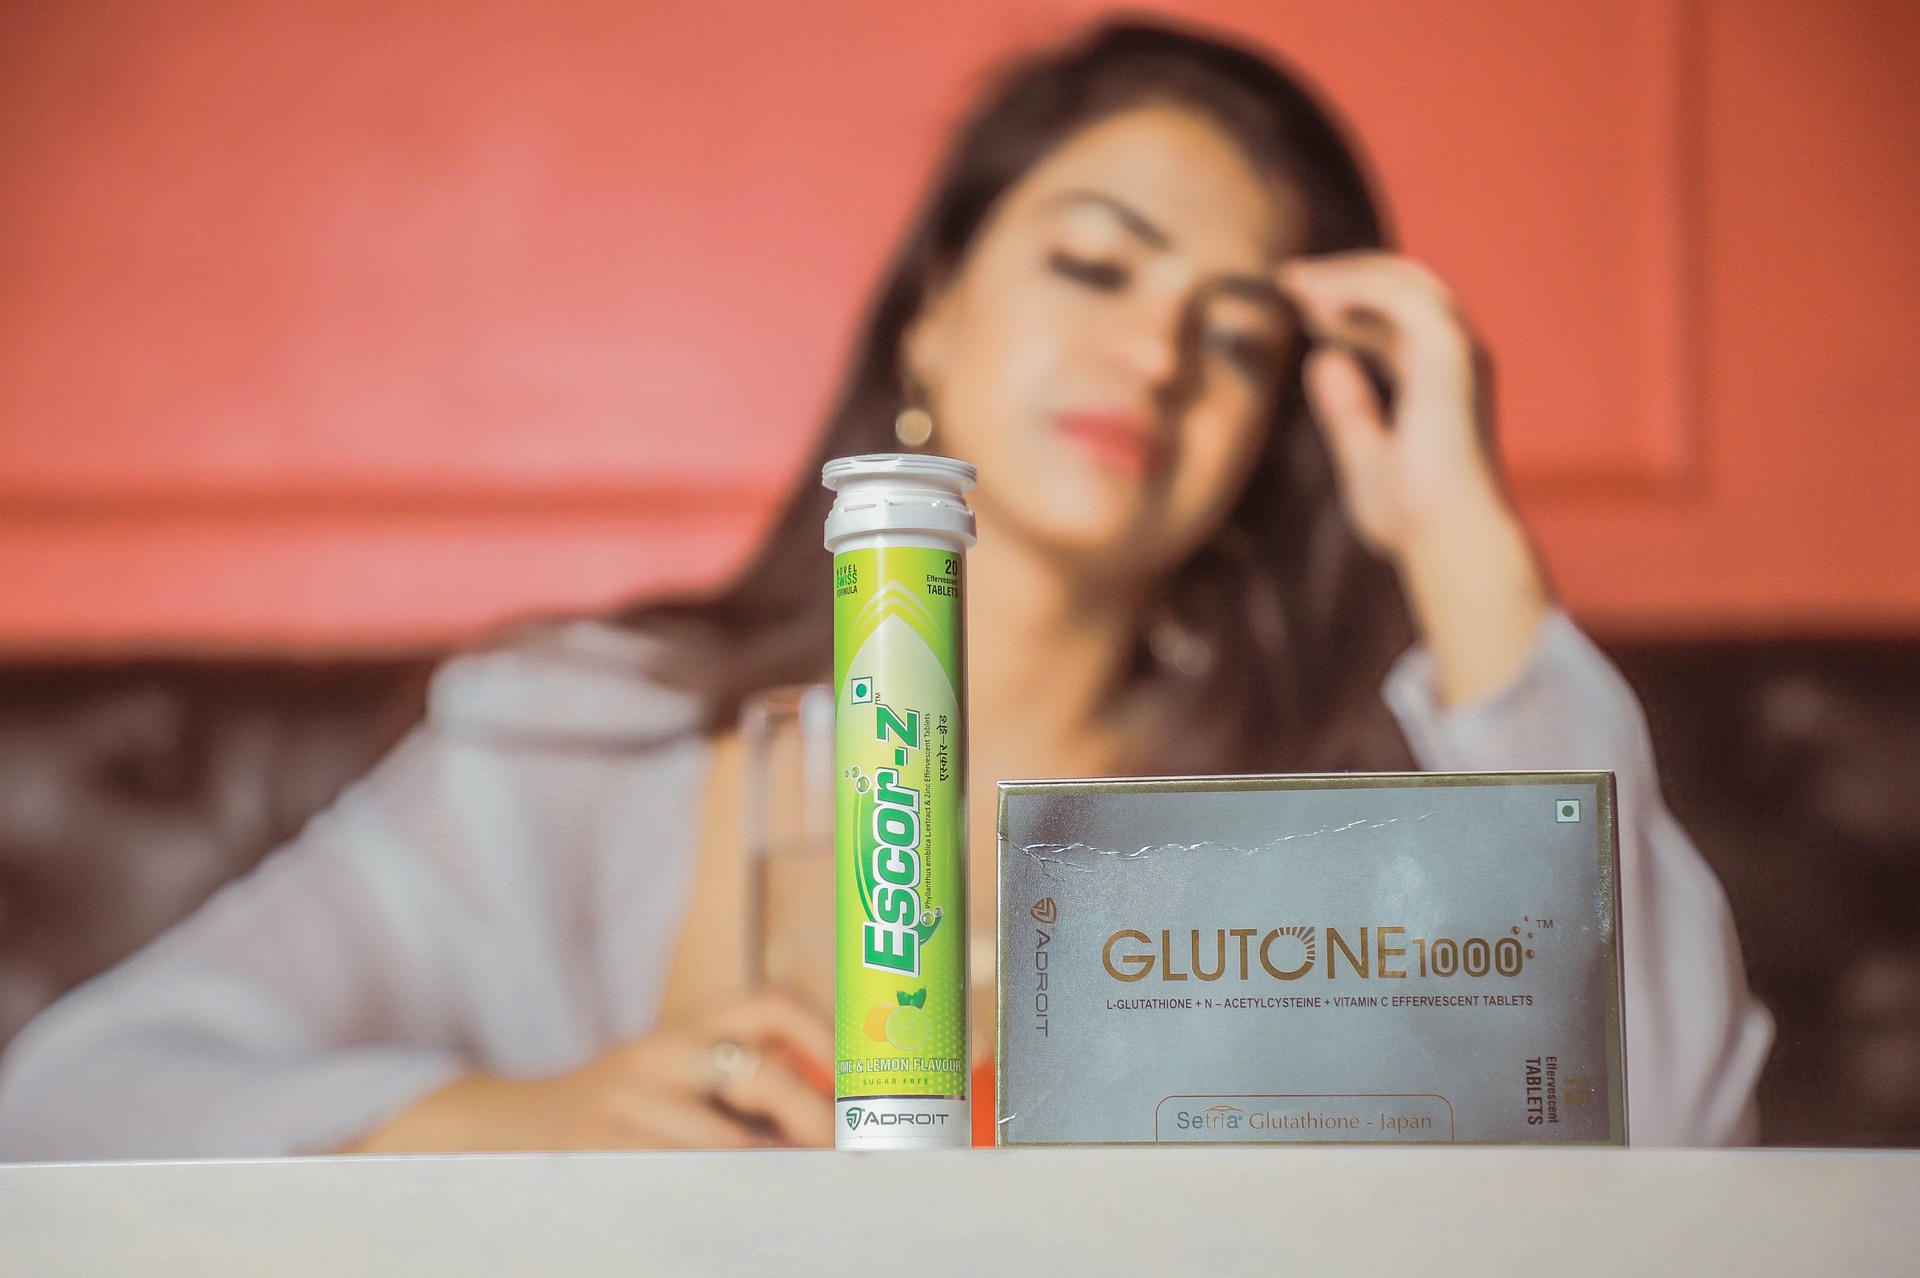 Have you ever heard of what Glutathione is? If not, hear now! image